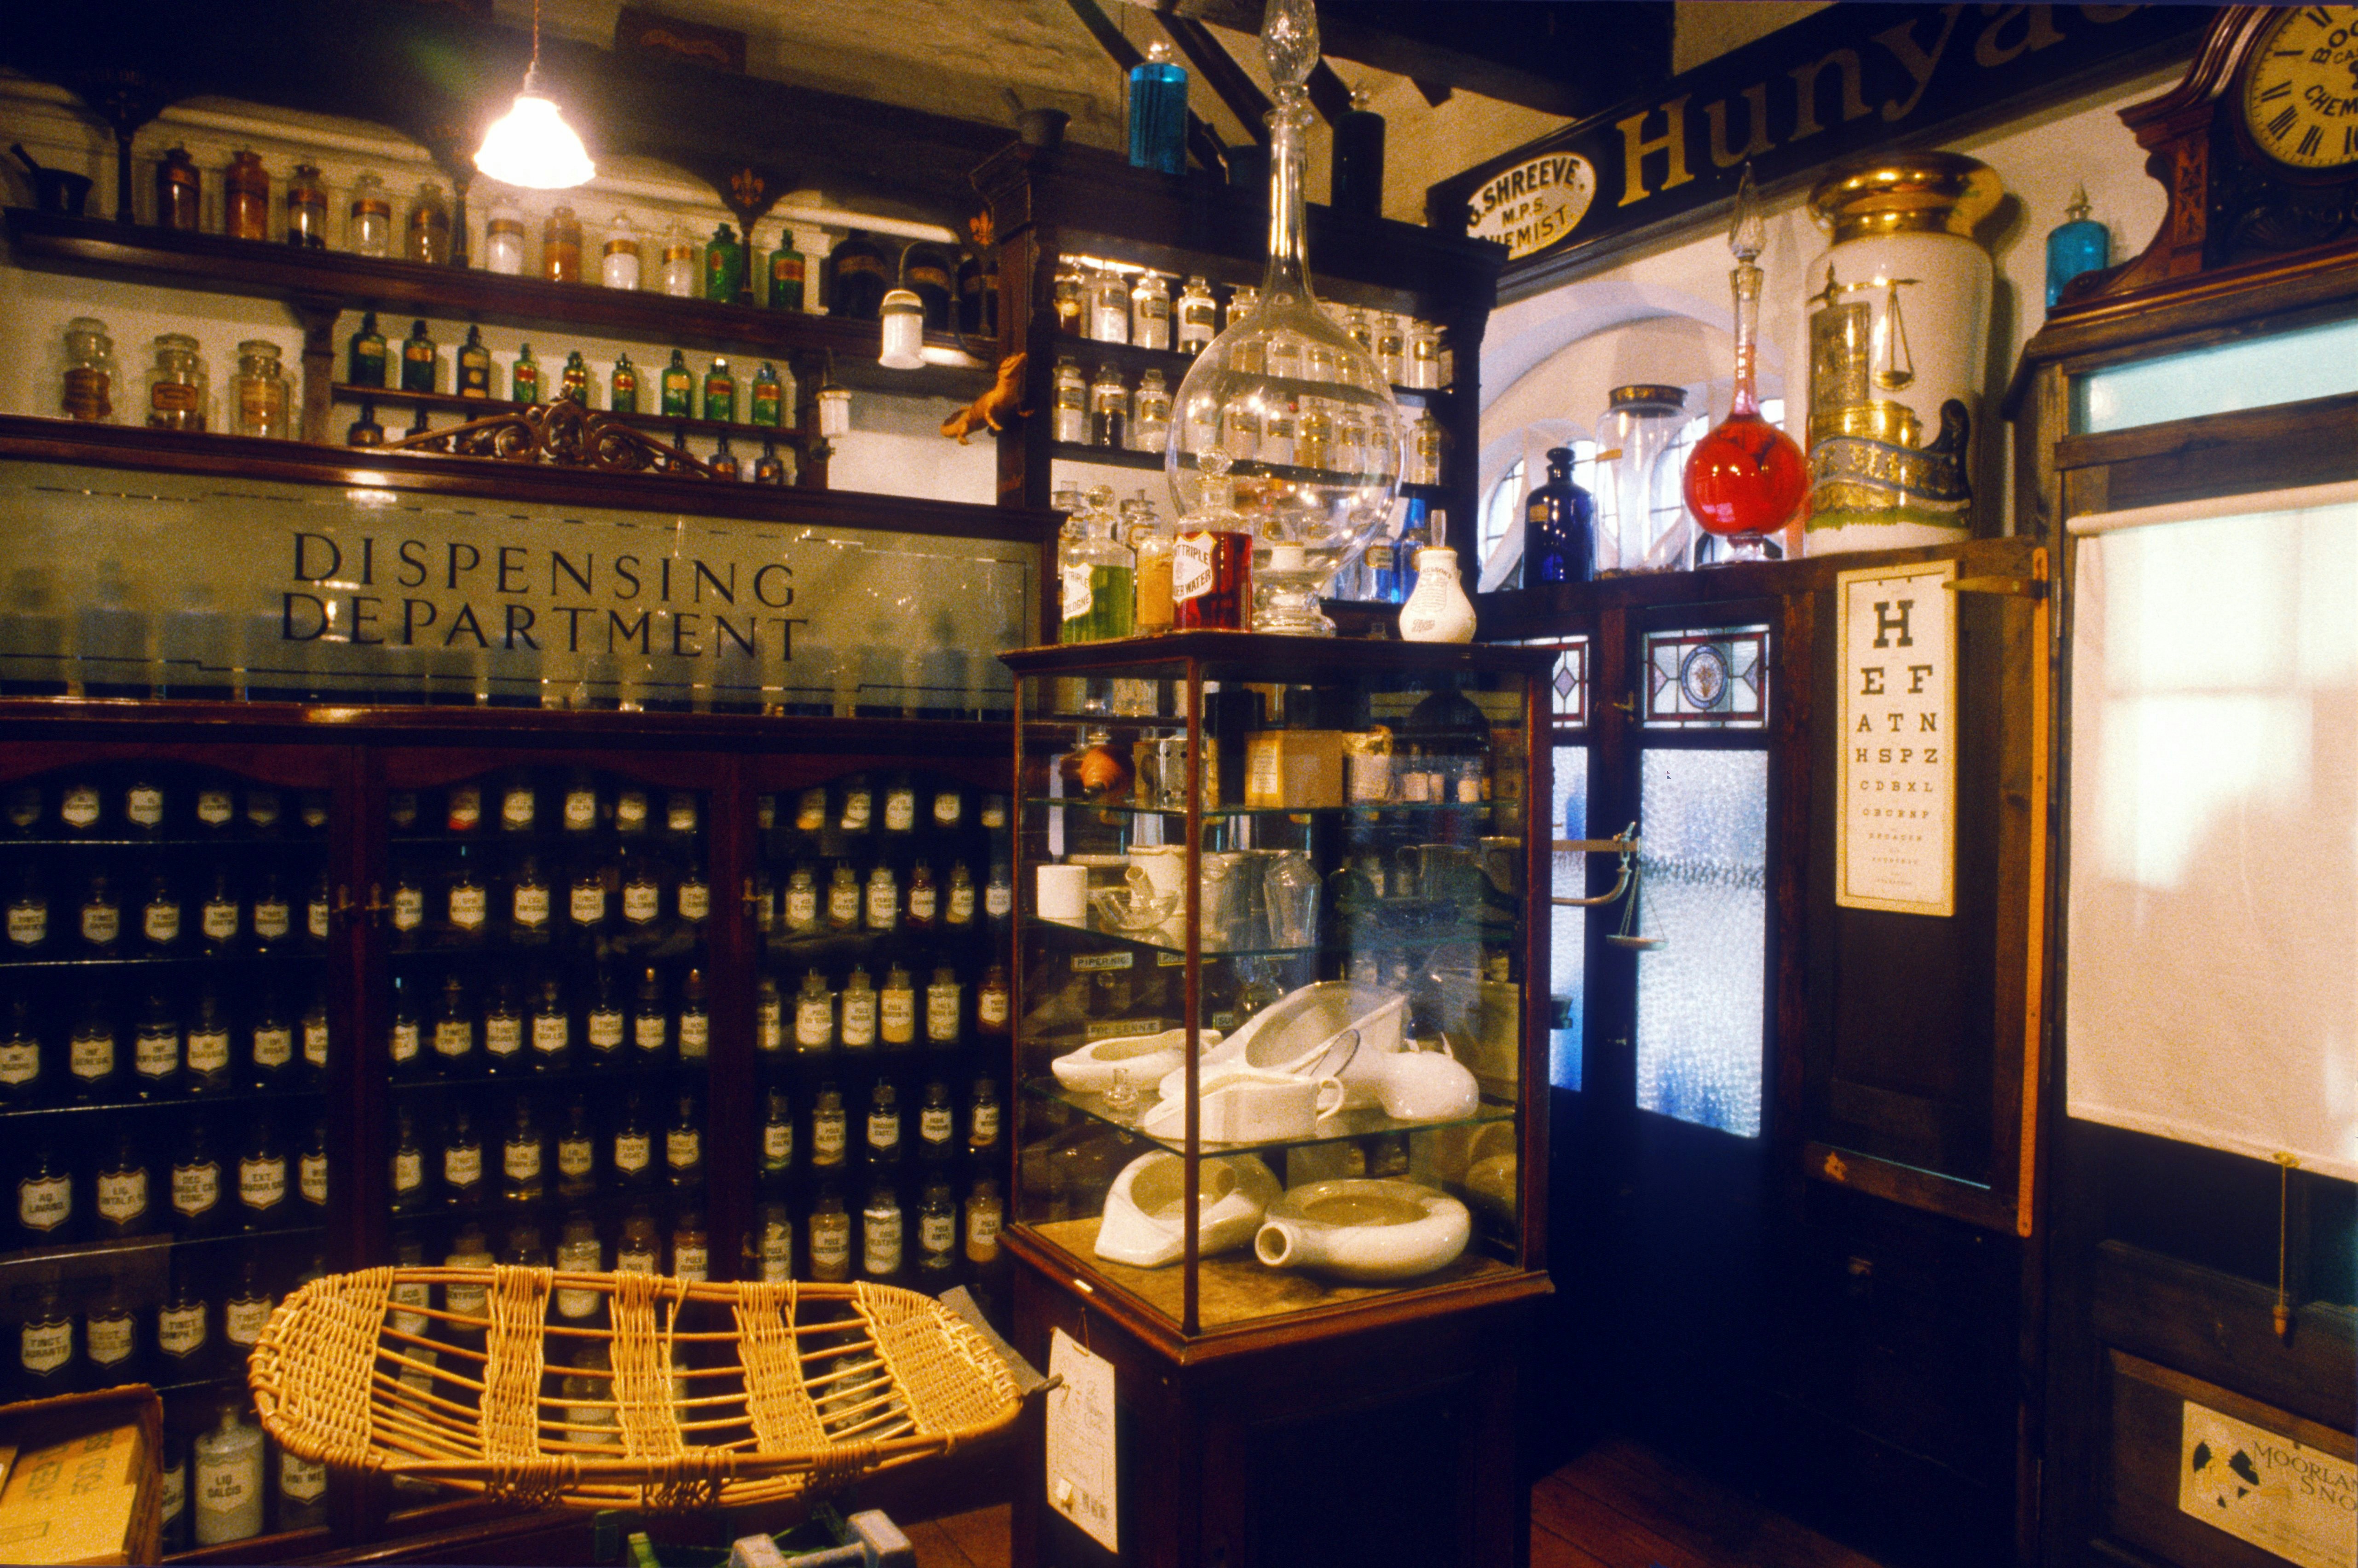 The interior of a reconstructed Chemist's shop in Bridewell Museum, Norwich, 1989.  (Photo By RDImages/Epics/Getty Images)

Museum of Norwich
